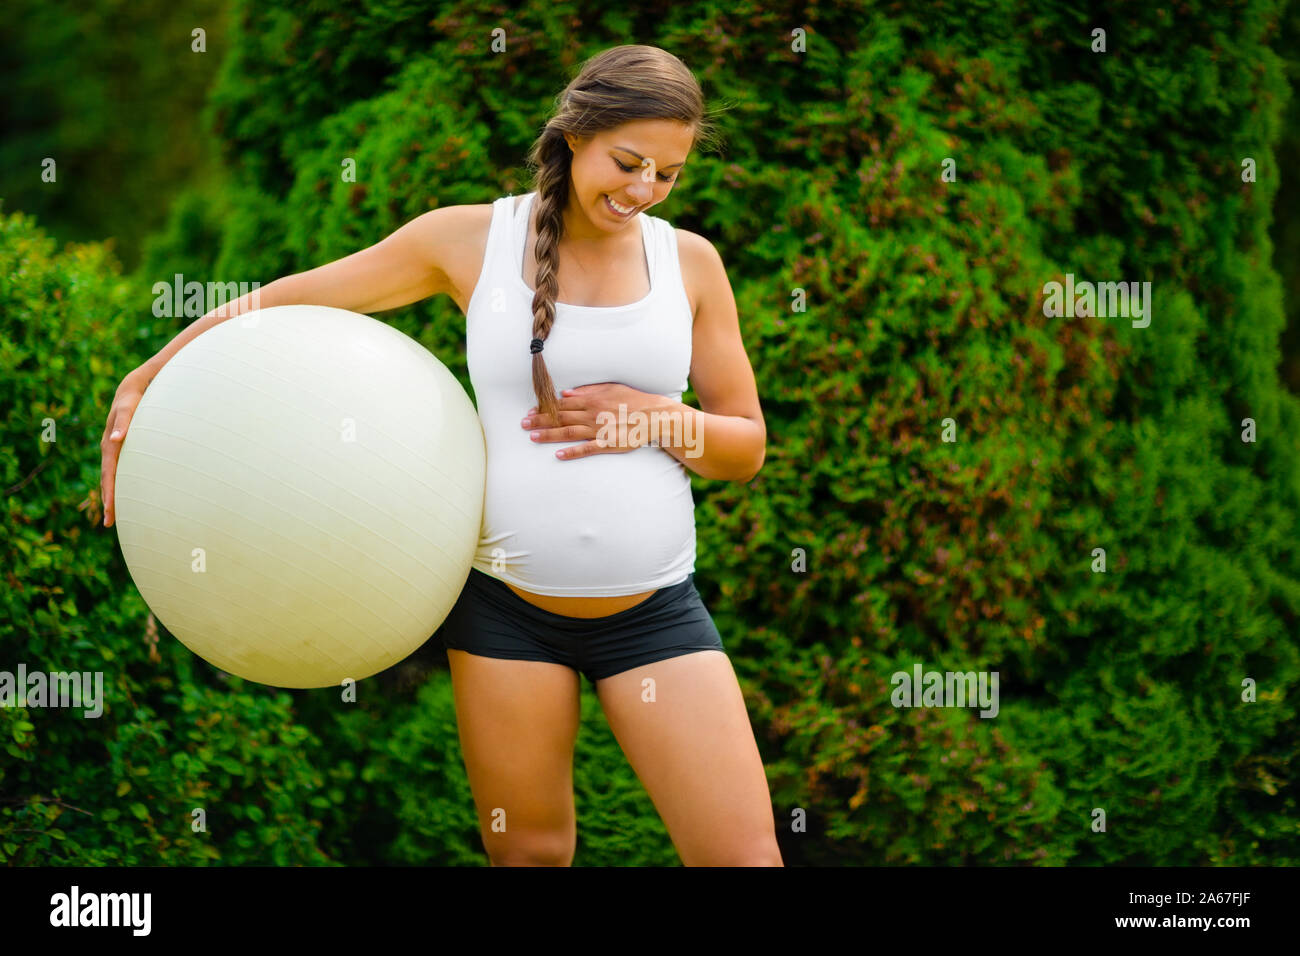 Expectant Mother Touching Stomach While Holding Exercise Ball In Park Stock Photo